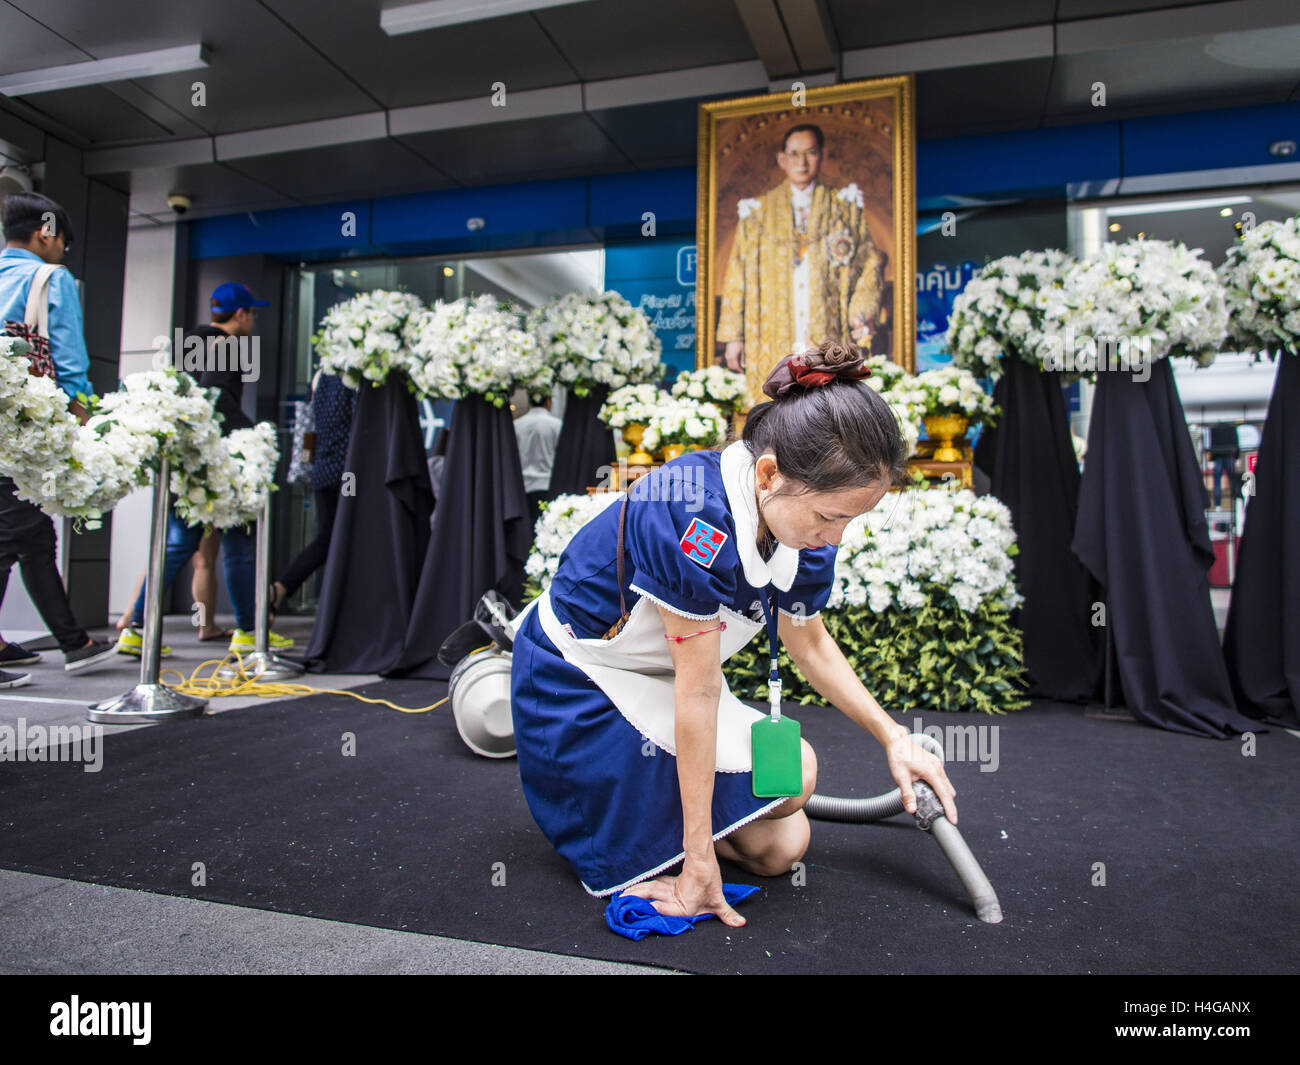 Bangkok, Bangkok, Thailand. 16th Oct, 2016. A worker cleans the carpet in front of a shrine for Thai King Bhumibol Adulyadej who died Oct. 13, 2016. He was 88. His death comes after a period of failing health. With the king's death, the world's longest-reigning monarch is Queen Elizabeth II, who ascended to the British throne in 1952. Bhumibol Adulyadej, was born in Cambridge, MA, on 5 December 1927. He was the ninth monarch of Thailand from the Chakri Dynasty and is known as Rama IX. He became King on June 9, 1946 and served as King of Thailand for 70 years, 126 days. He was, at the time Stock Photo